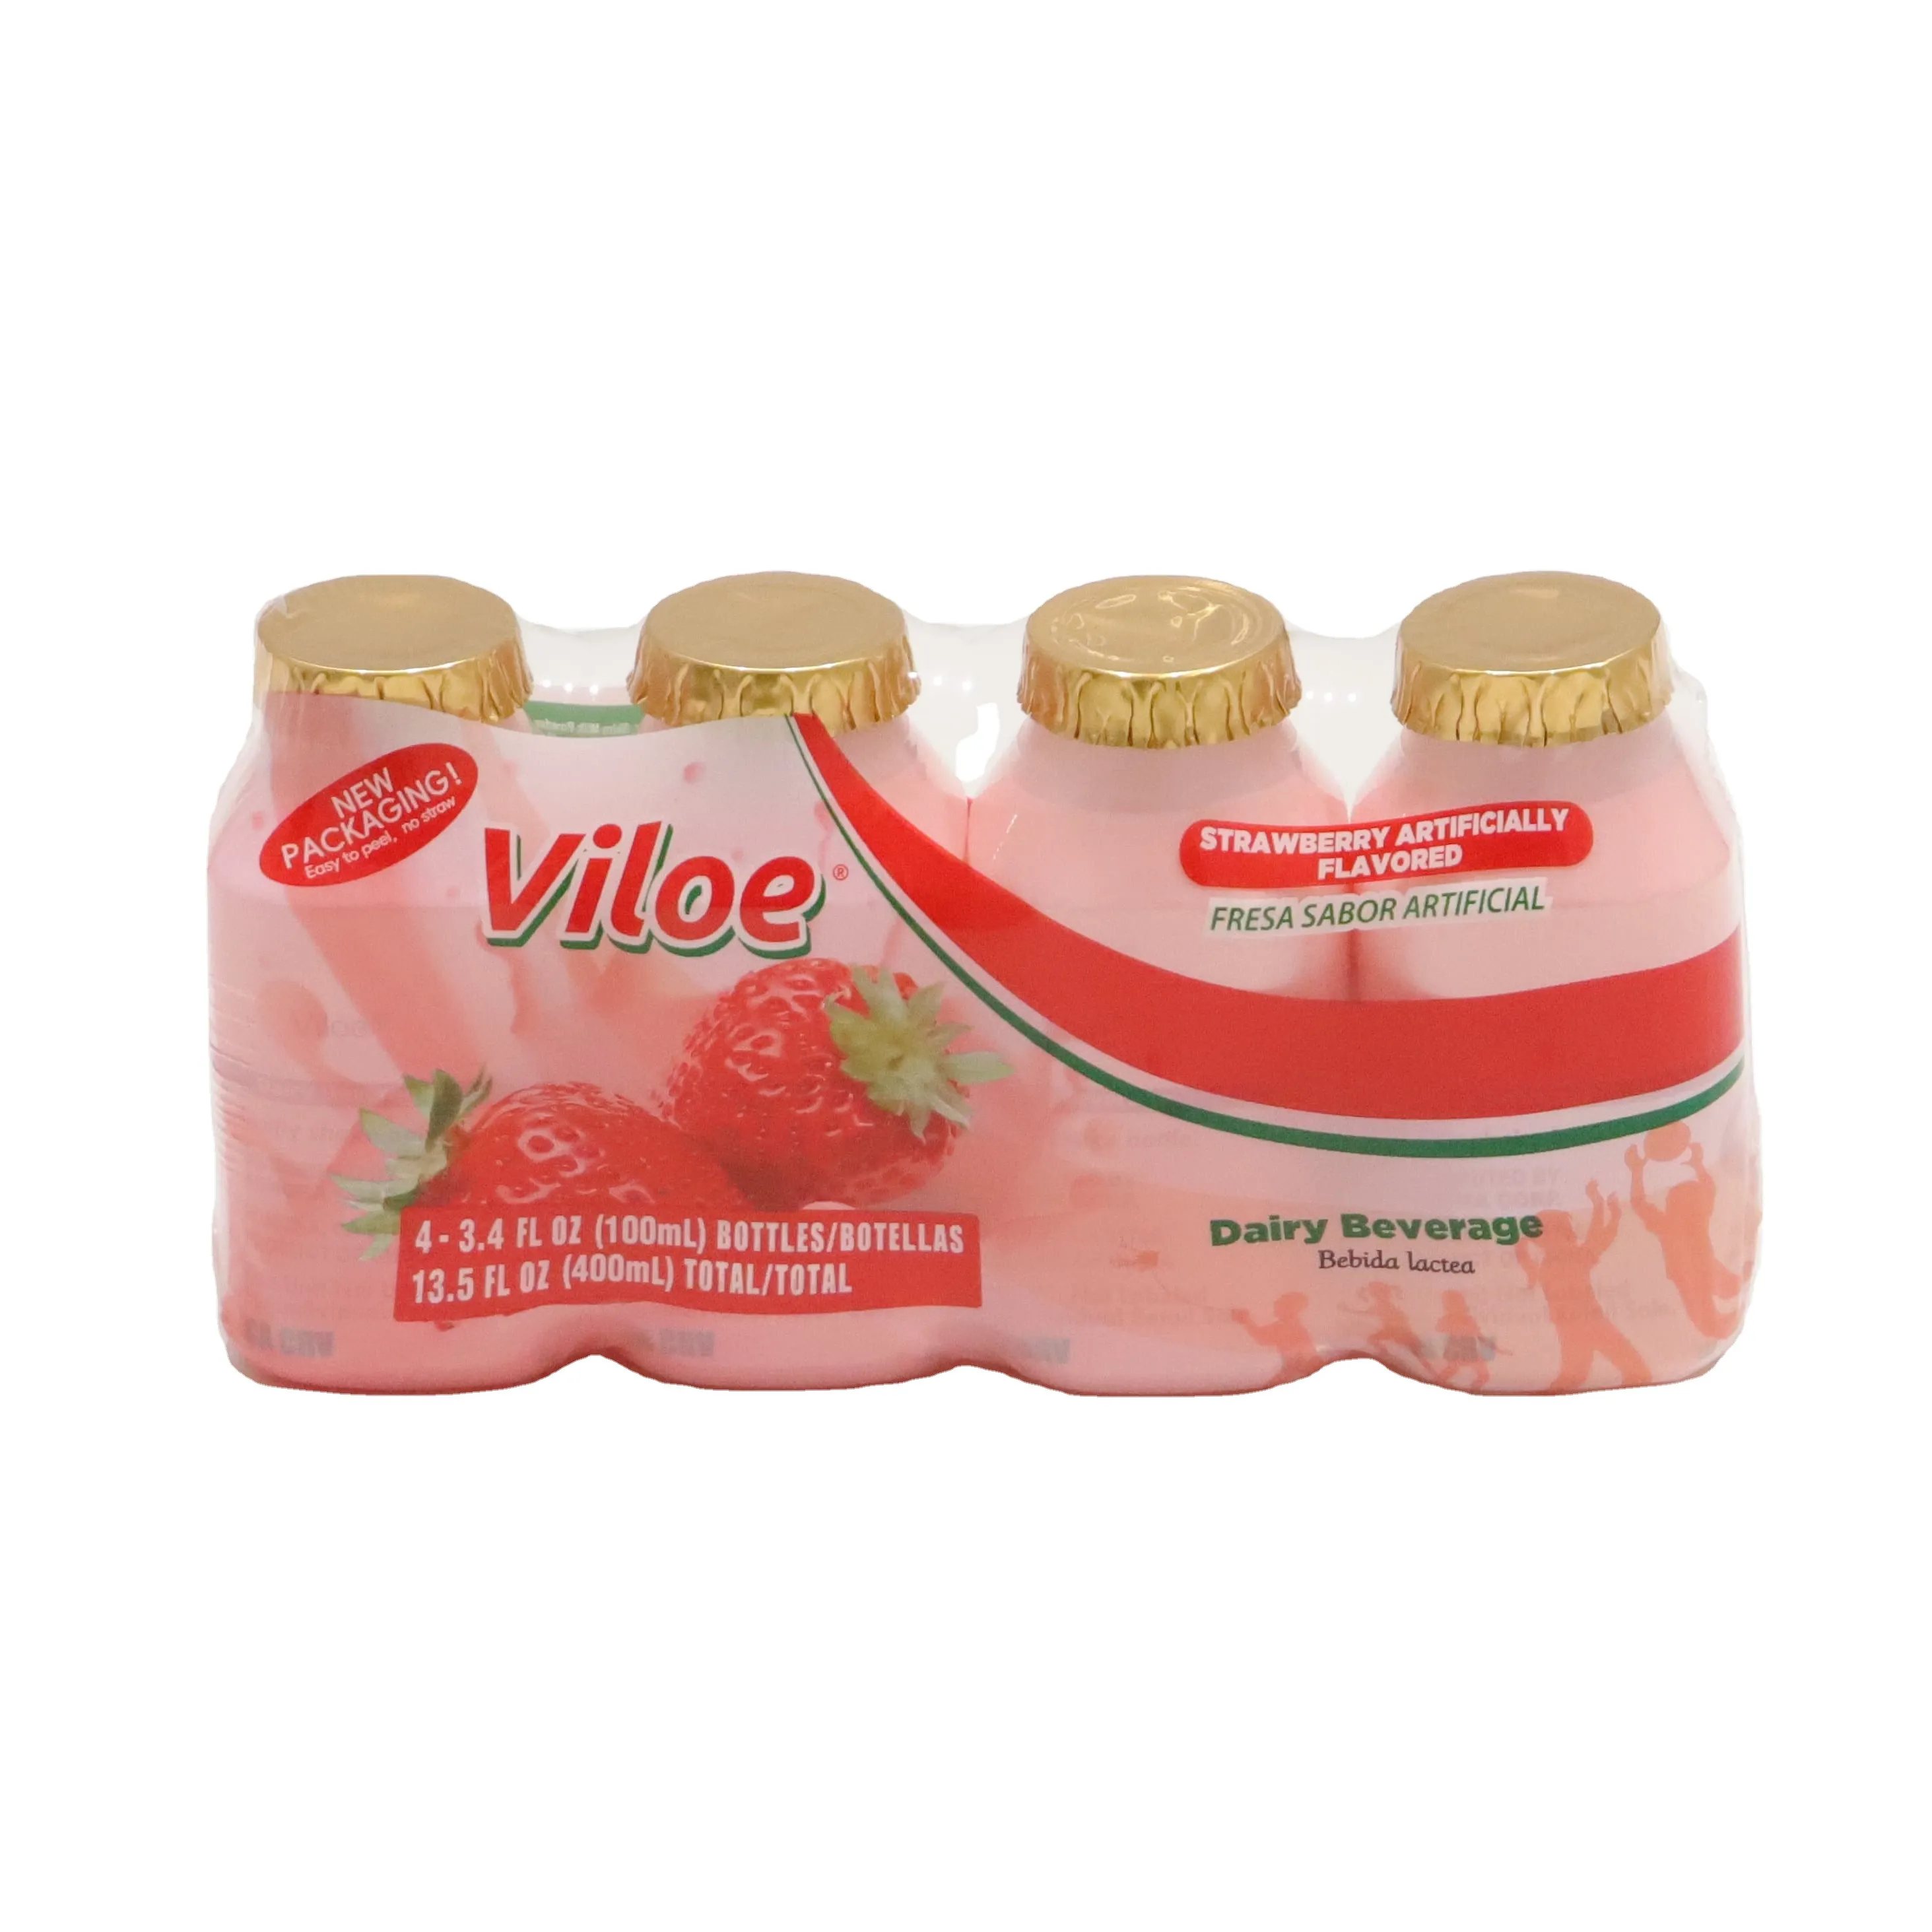 Viloe Soft Drinks about Healthy and Delicious Dairy Beverage with Mango and Strawberry Flavors